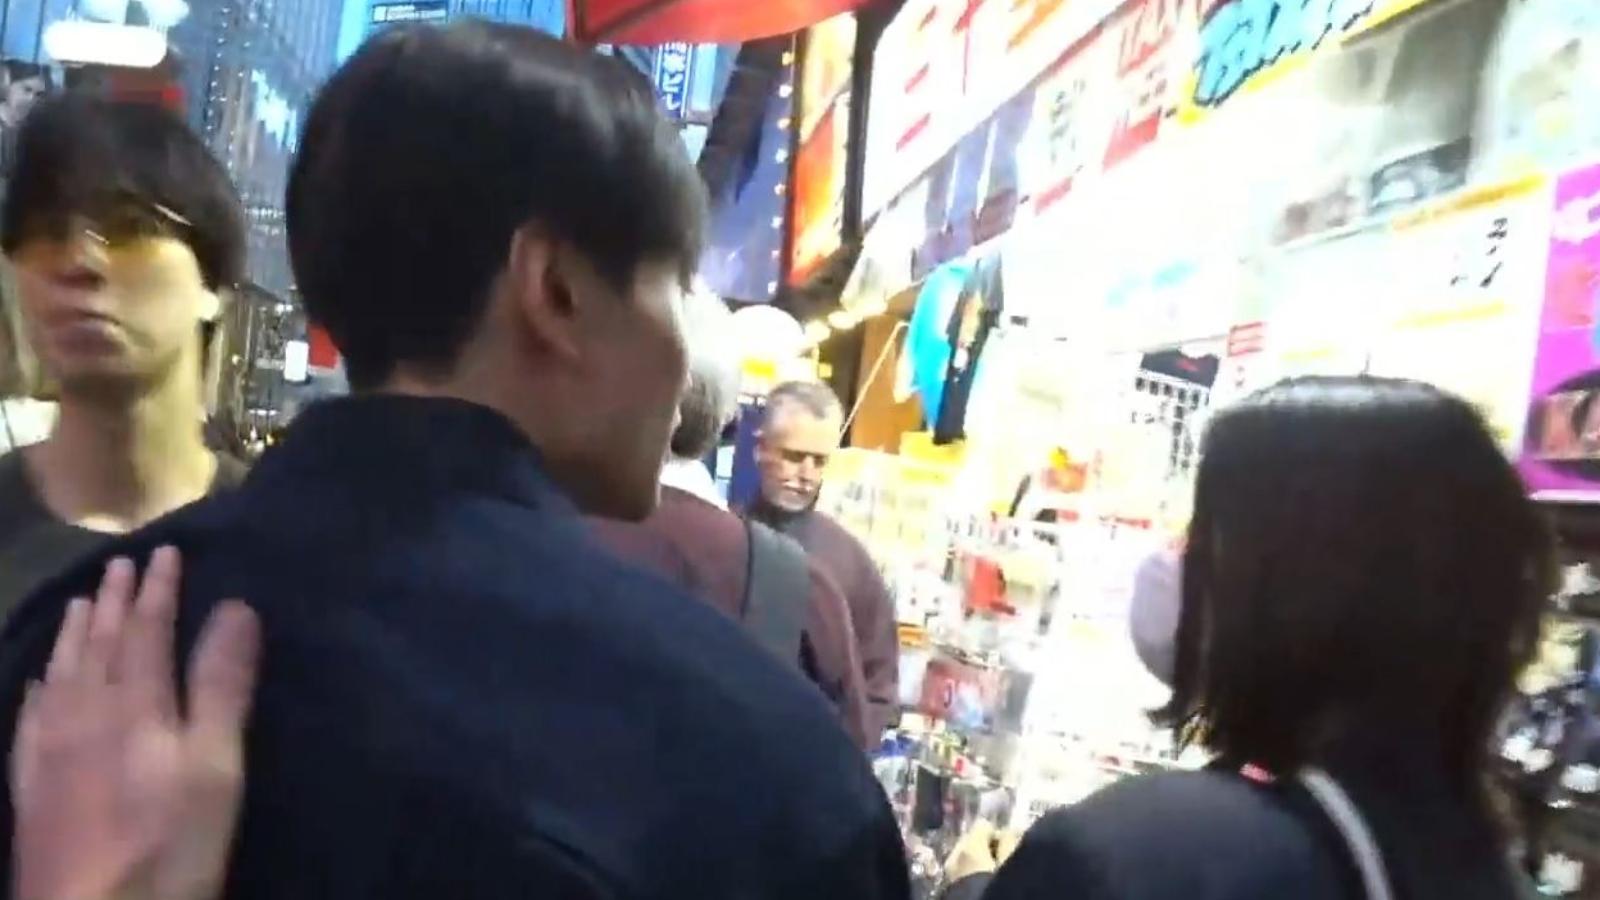 Streamer SAMMIT saves woman from man in Japan.